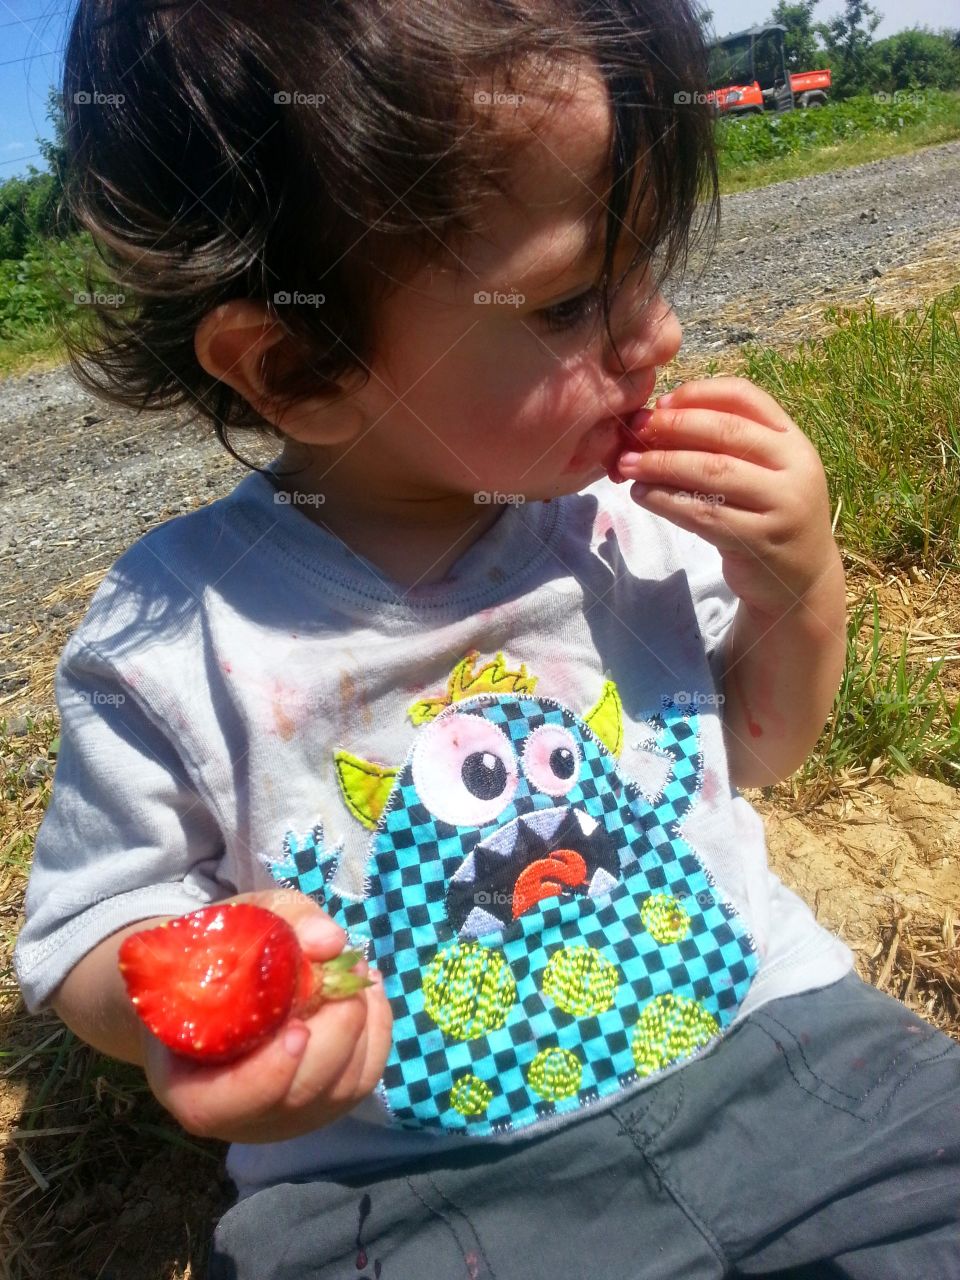 strawberry monster . even his monster was in shock 